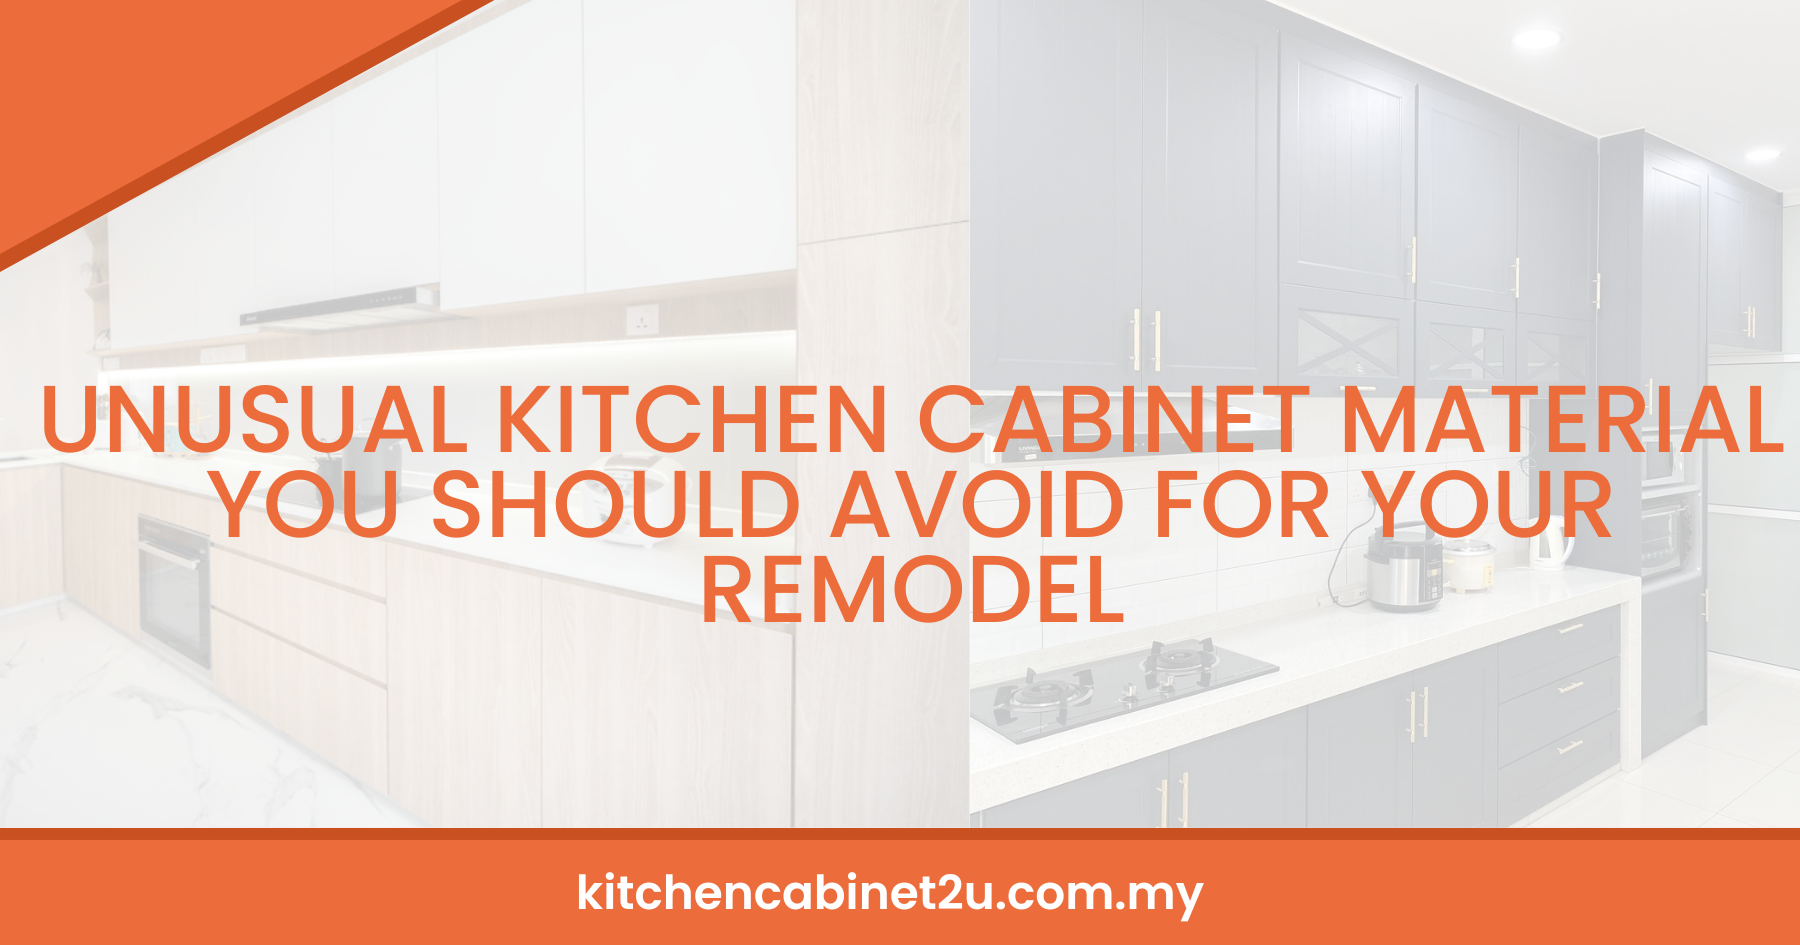 Unusual Kitchen Cabinet Material You Should Avoid for your Remodel